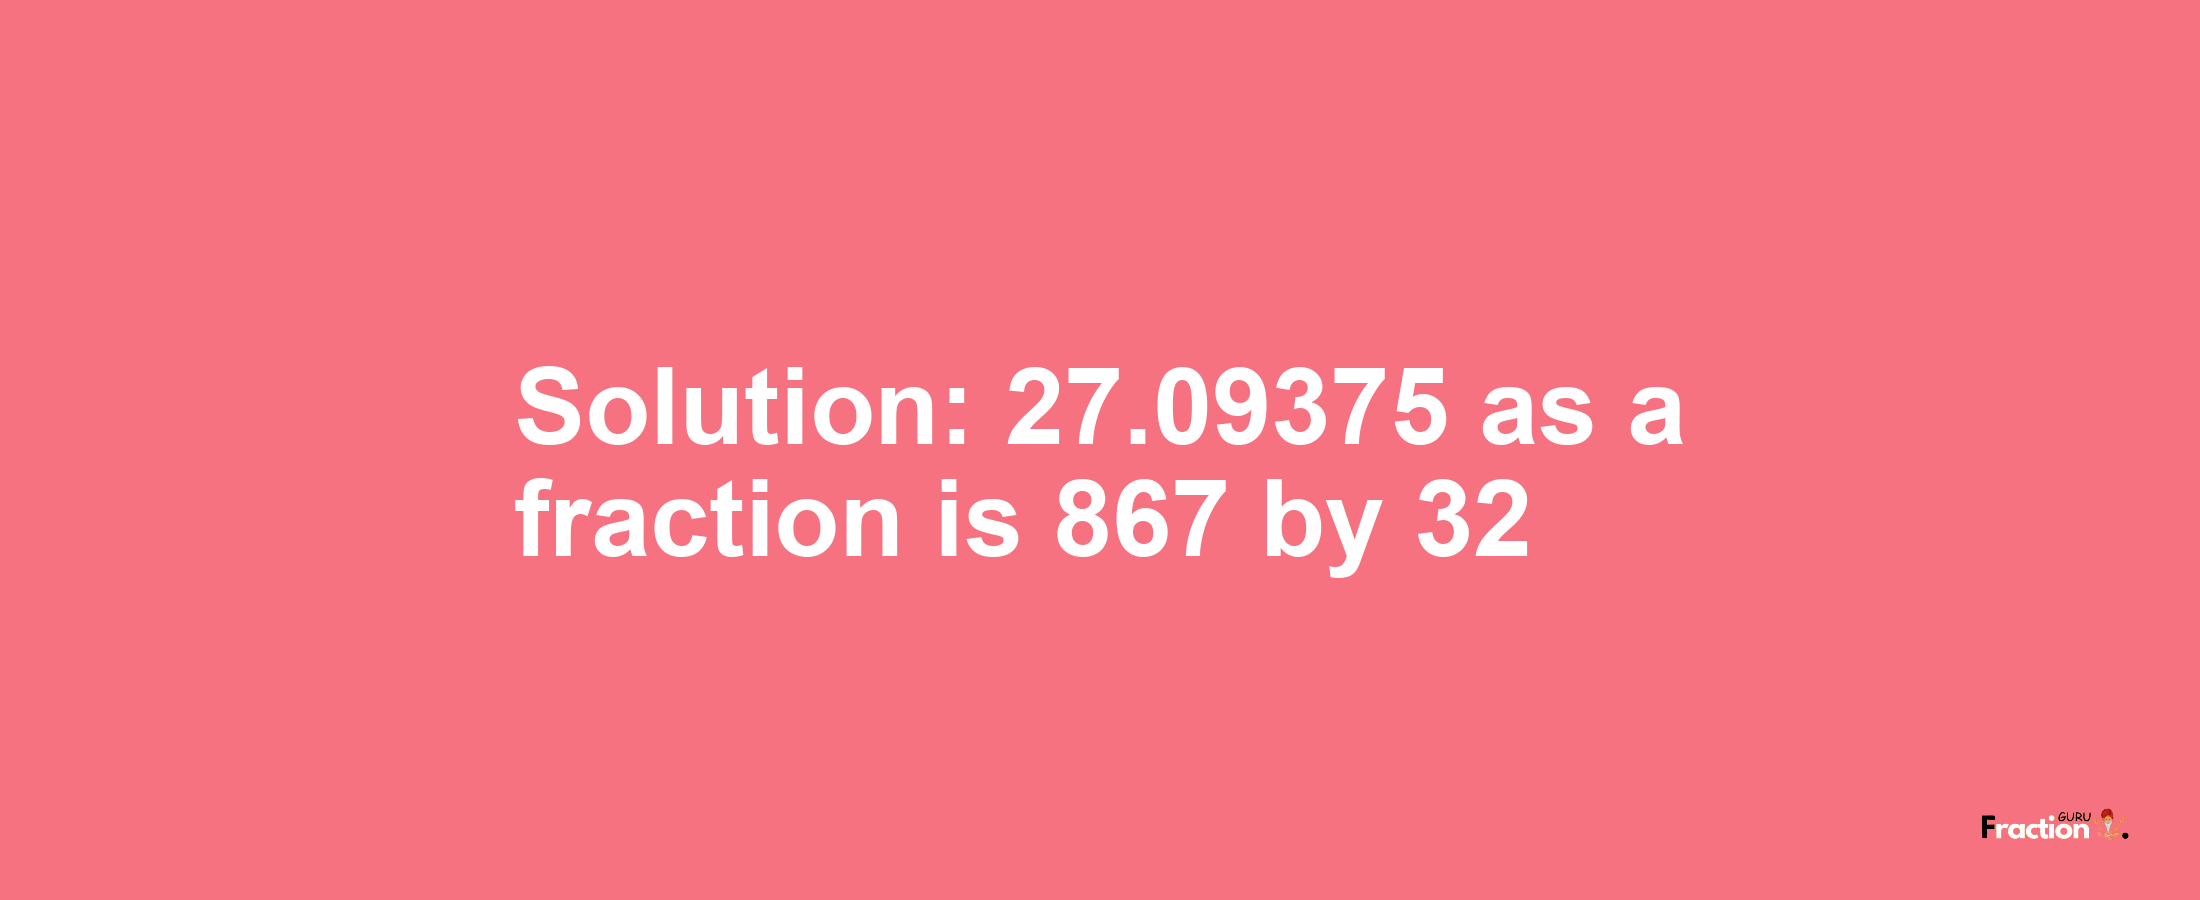 Solution:27.09375 as a fraction is 867/32